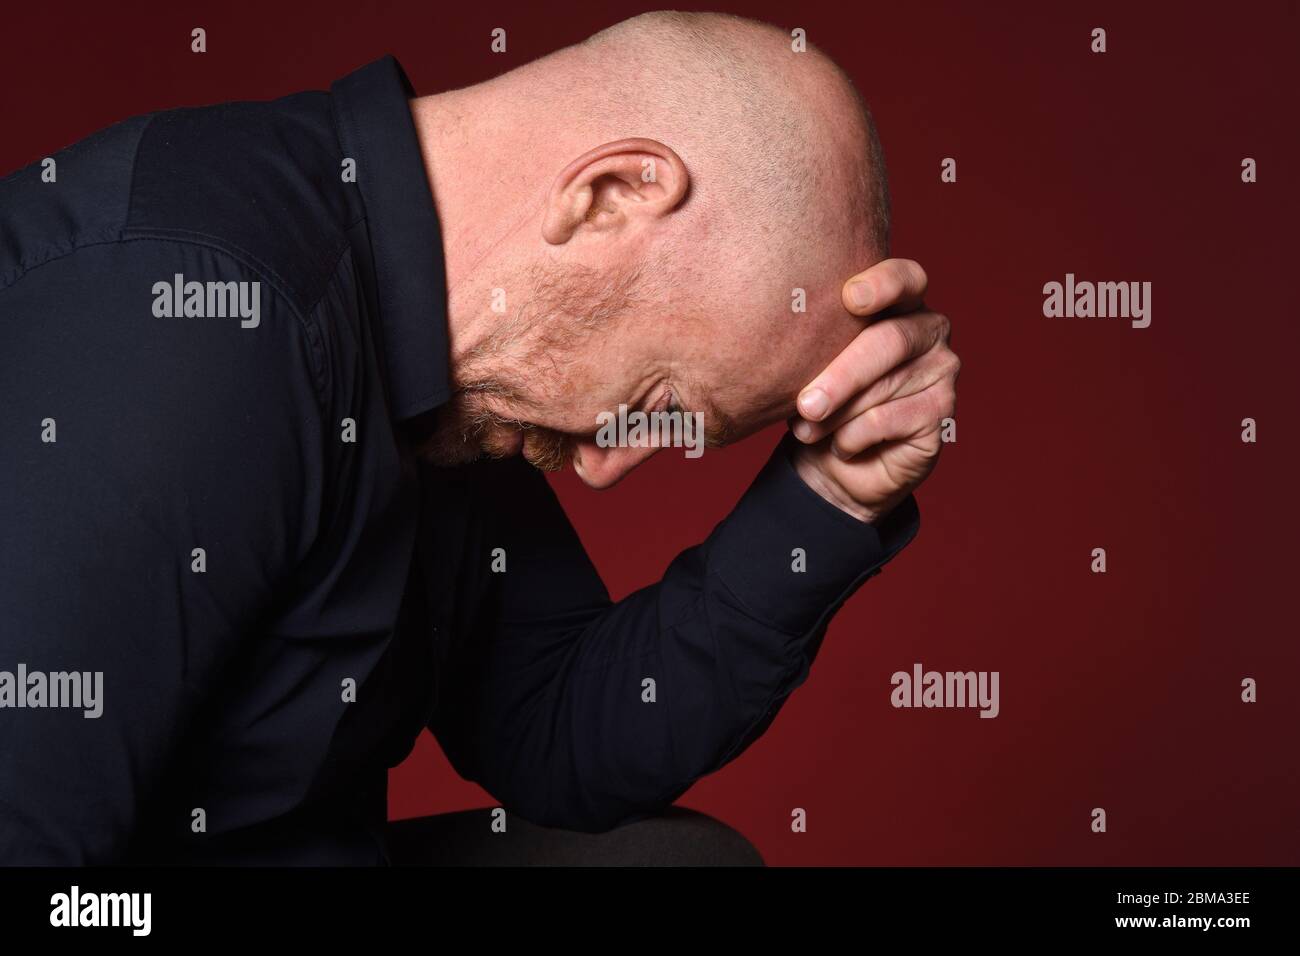 portrait of a desperate man on red background Stock Photo